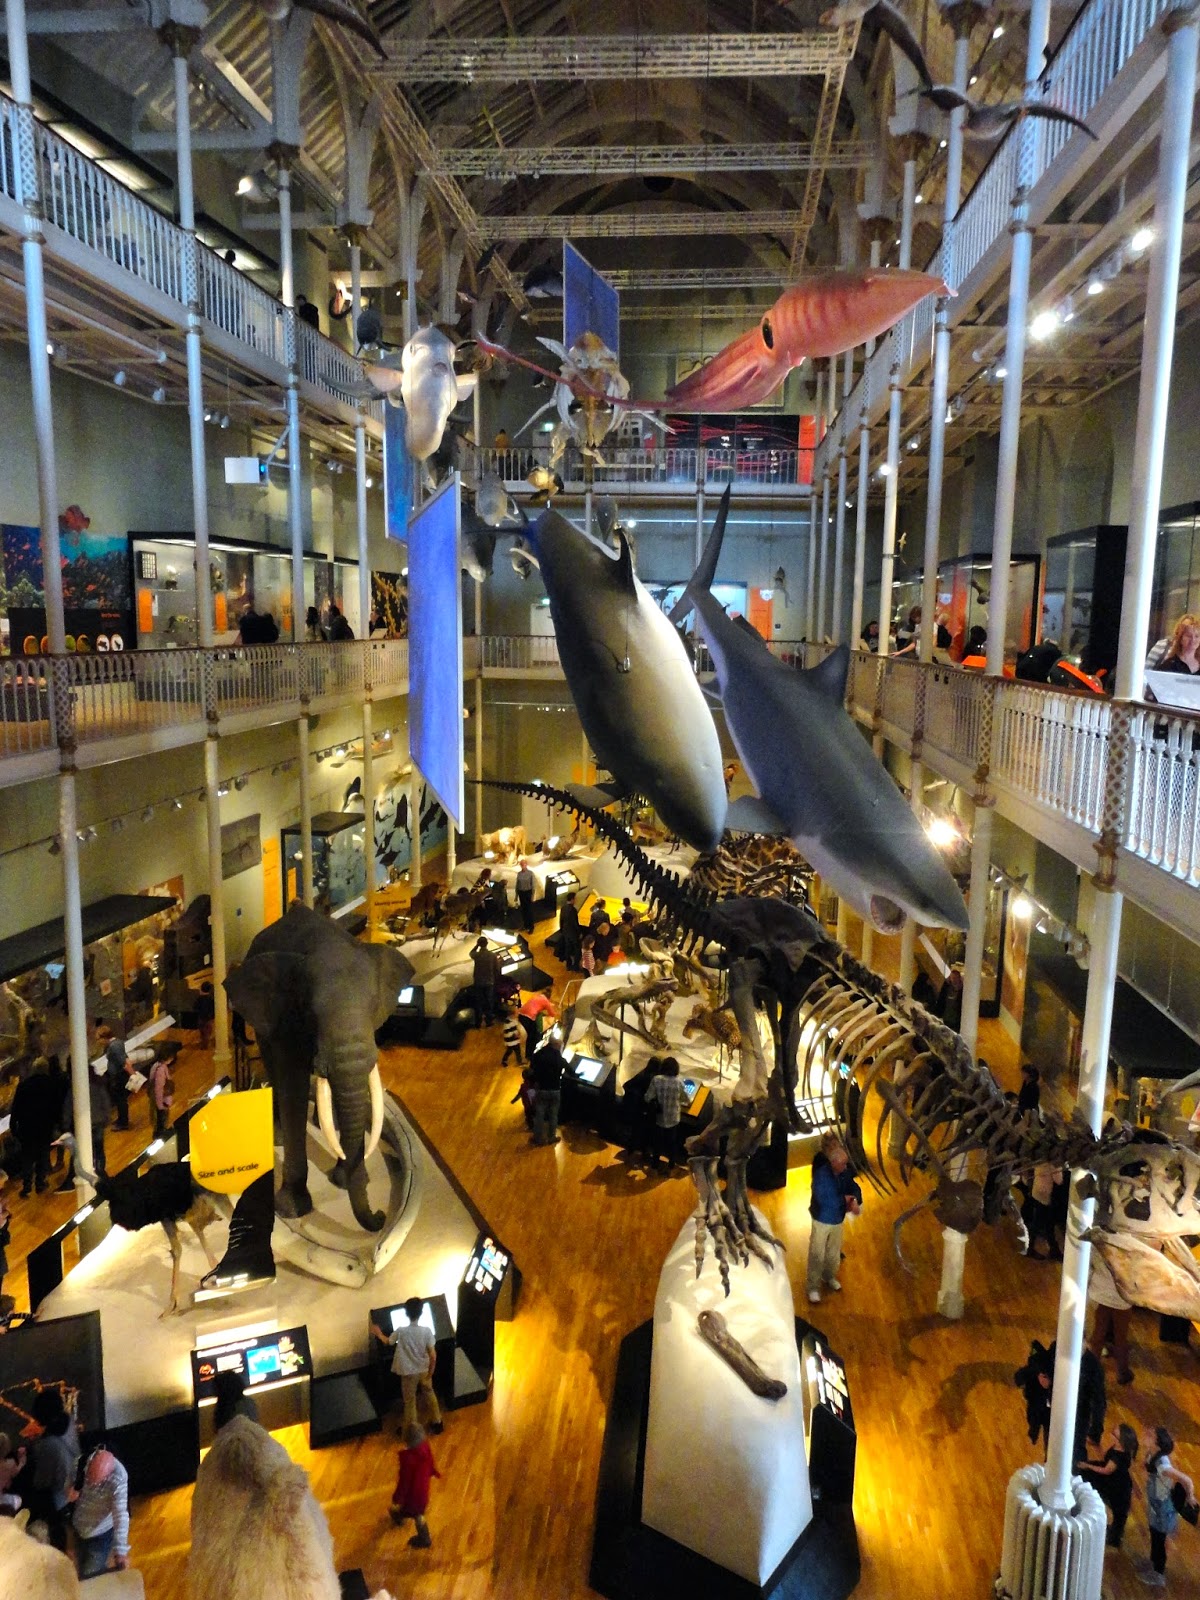 Natural History hall in the National Museum of Scotland, Edinburgh